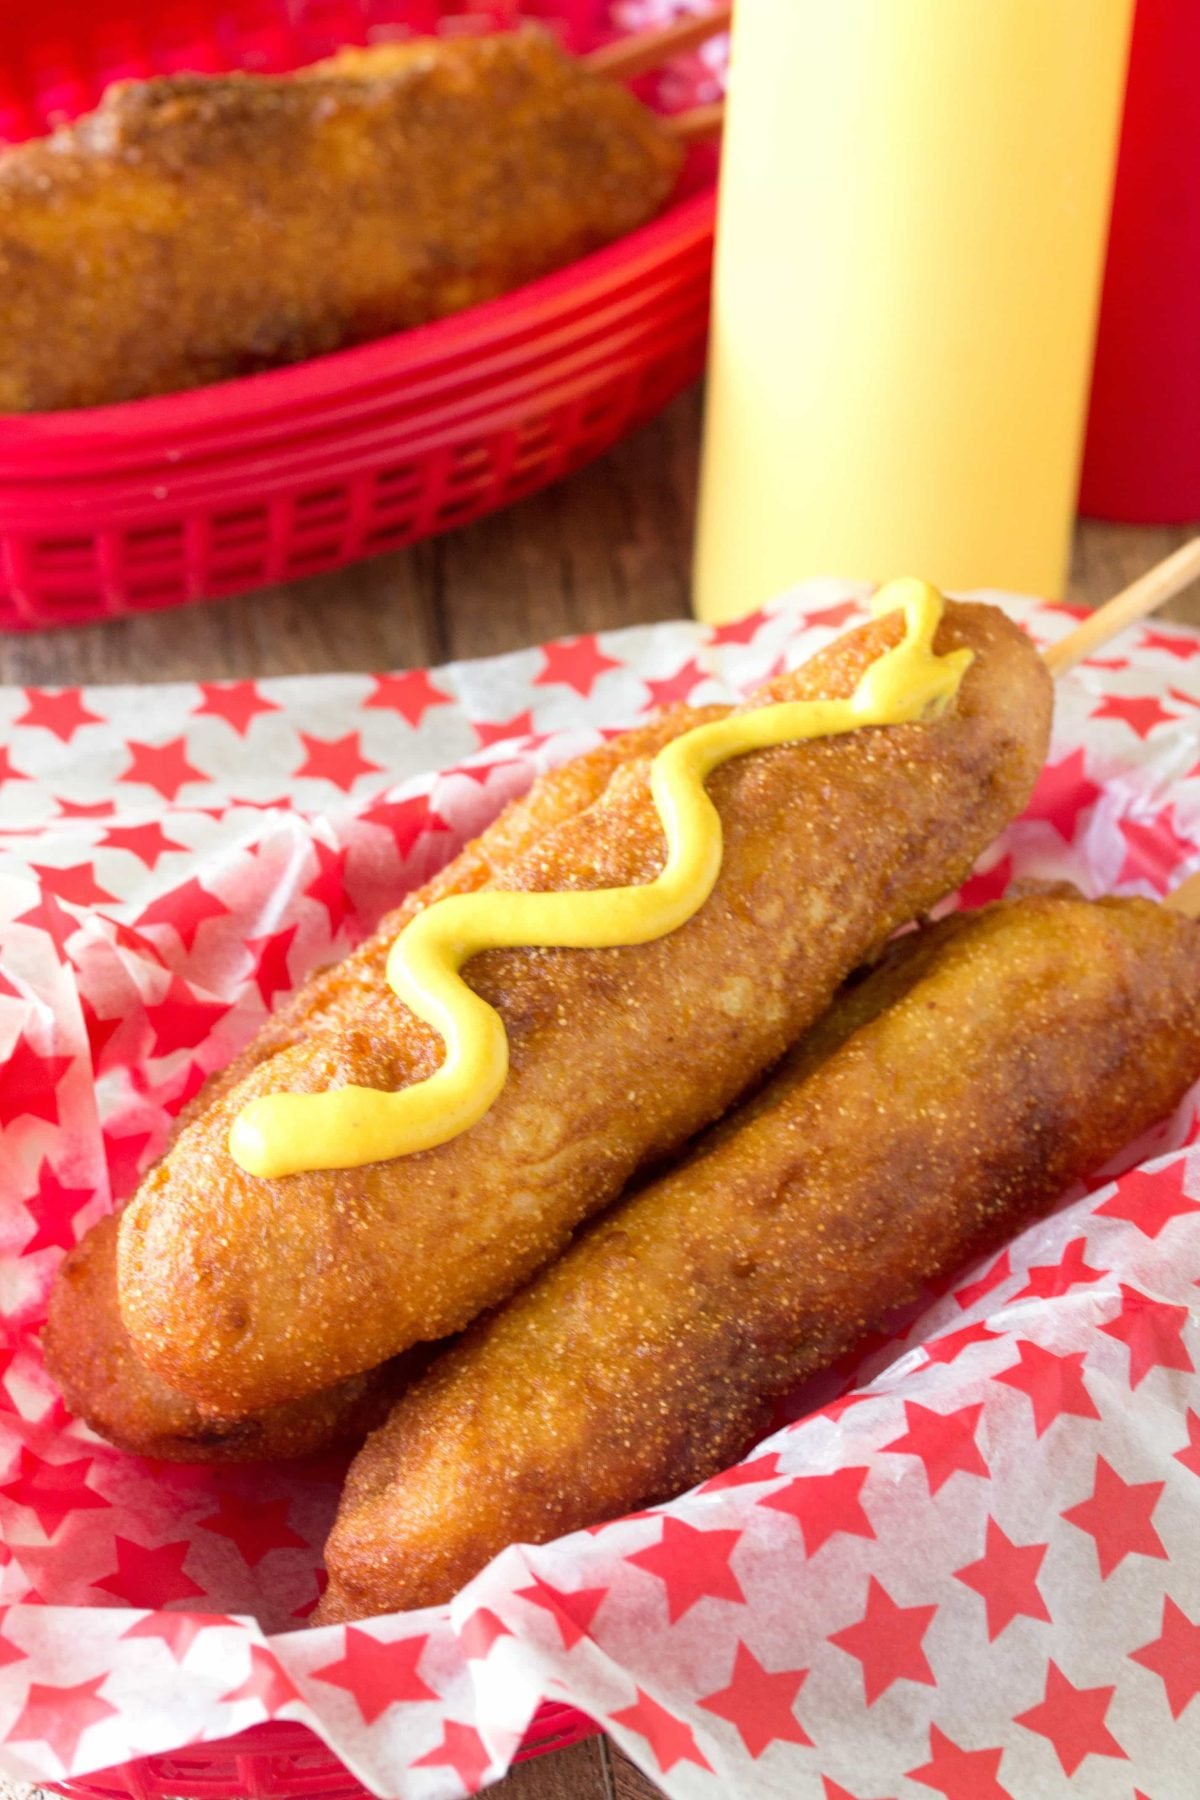 These Disneyland-Style Hand Dipped Corn Dogs are covered with a thick cornbread coating and fried to golden brown perfection. It’s just like they make them on Main Street at Disneyland’s Little Red Wagon. 